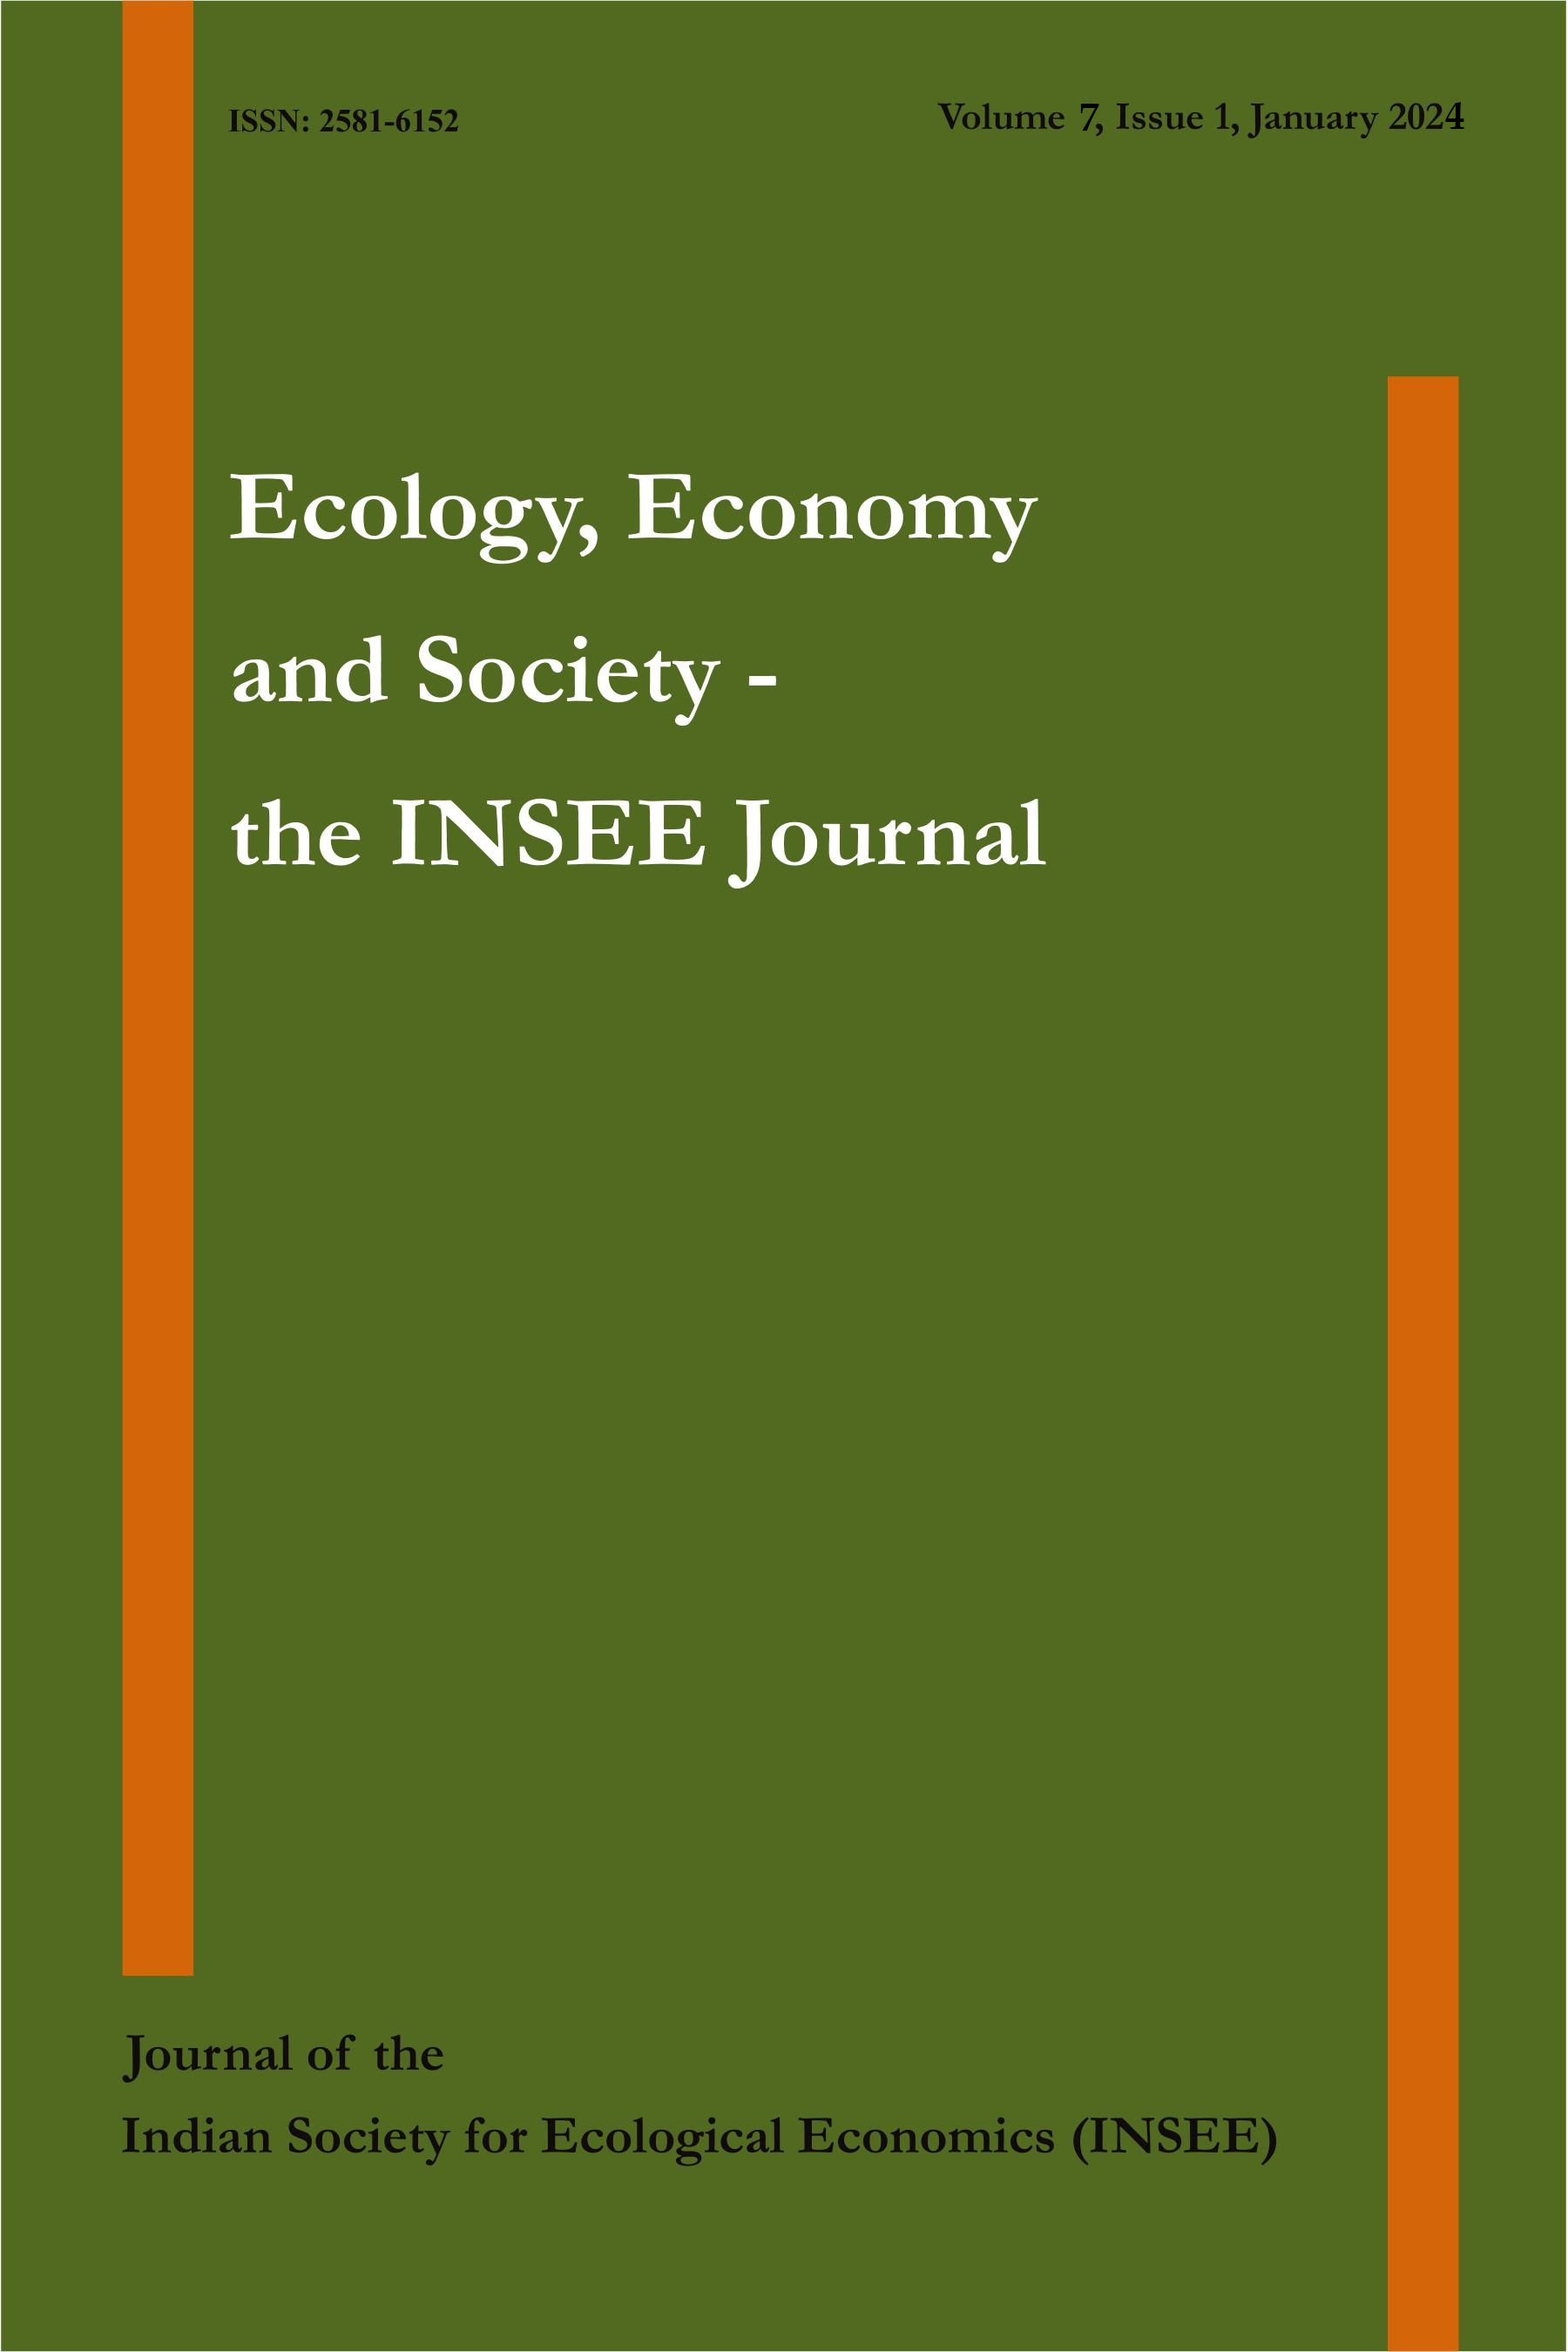 					View Vol. 7 No. 1 (2024): Ecology, Economy and Society--the INSEE Journal
				